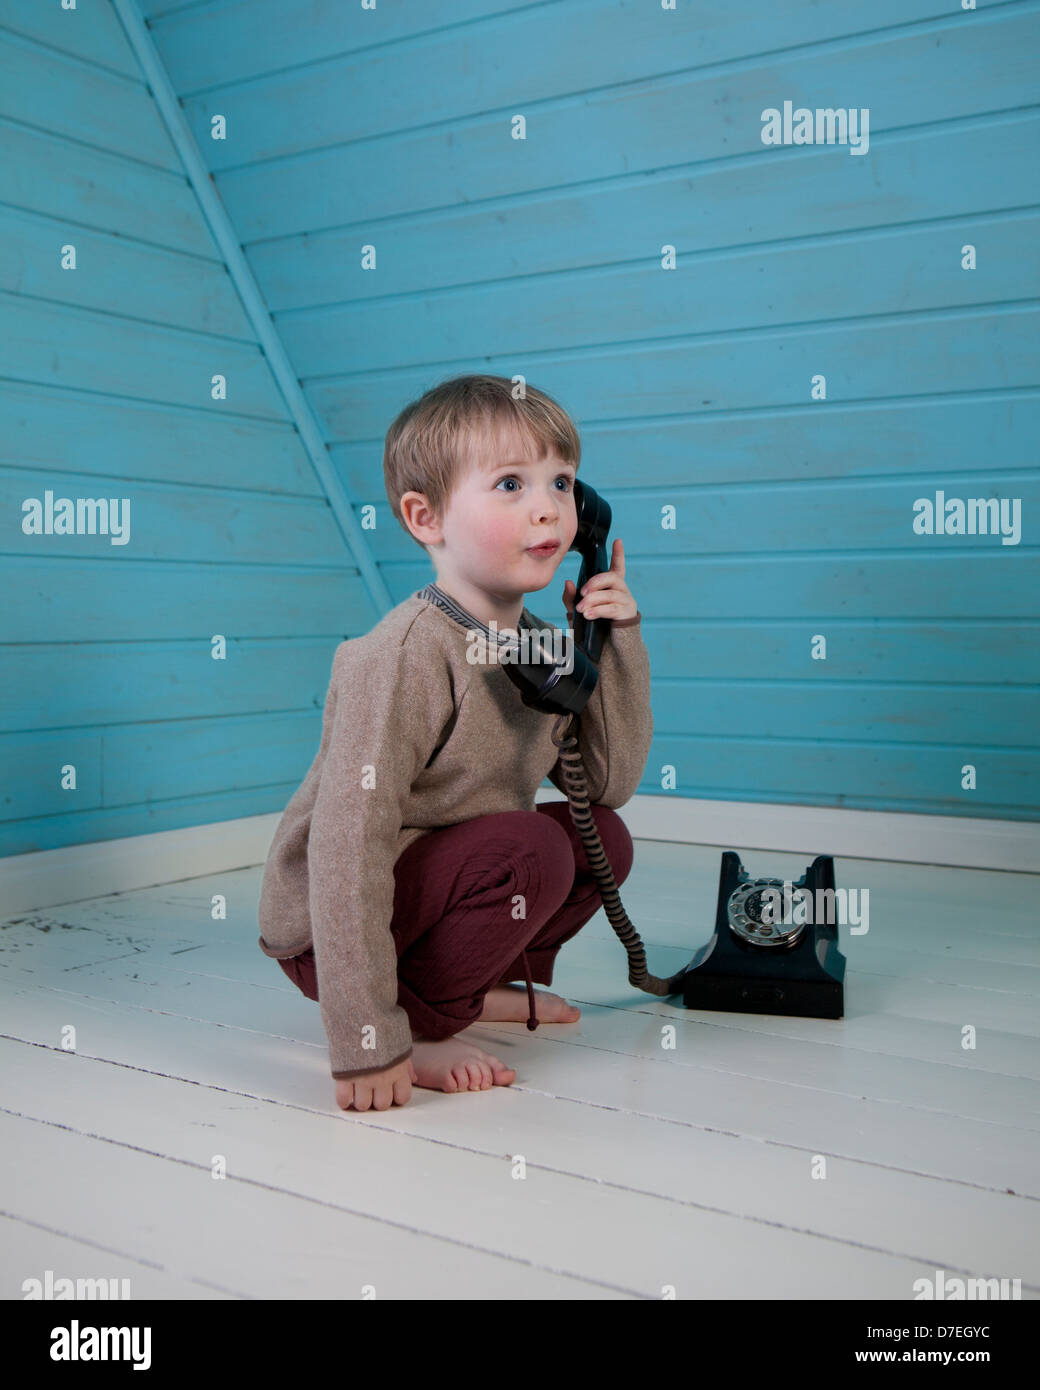 A boy playing with an old fashioned rotary dial telephone sitting on the white wooden floor barefoot in a blue loft room Stock Photo